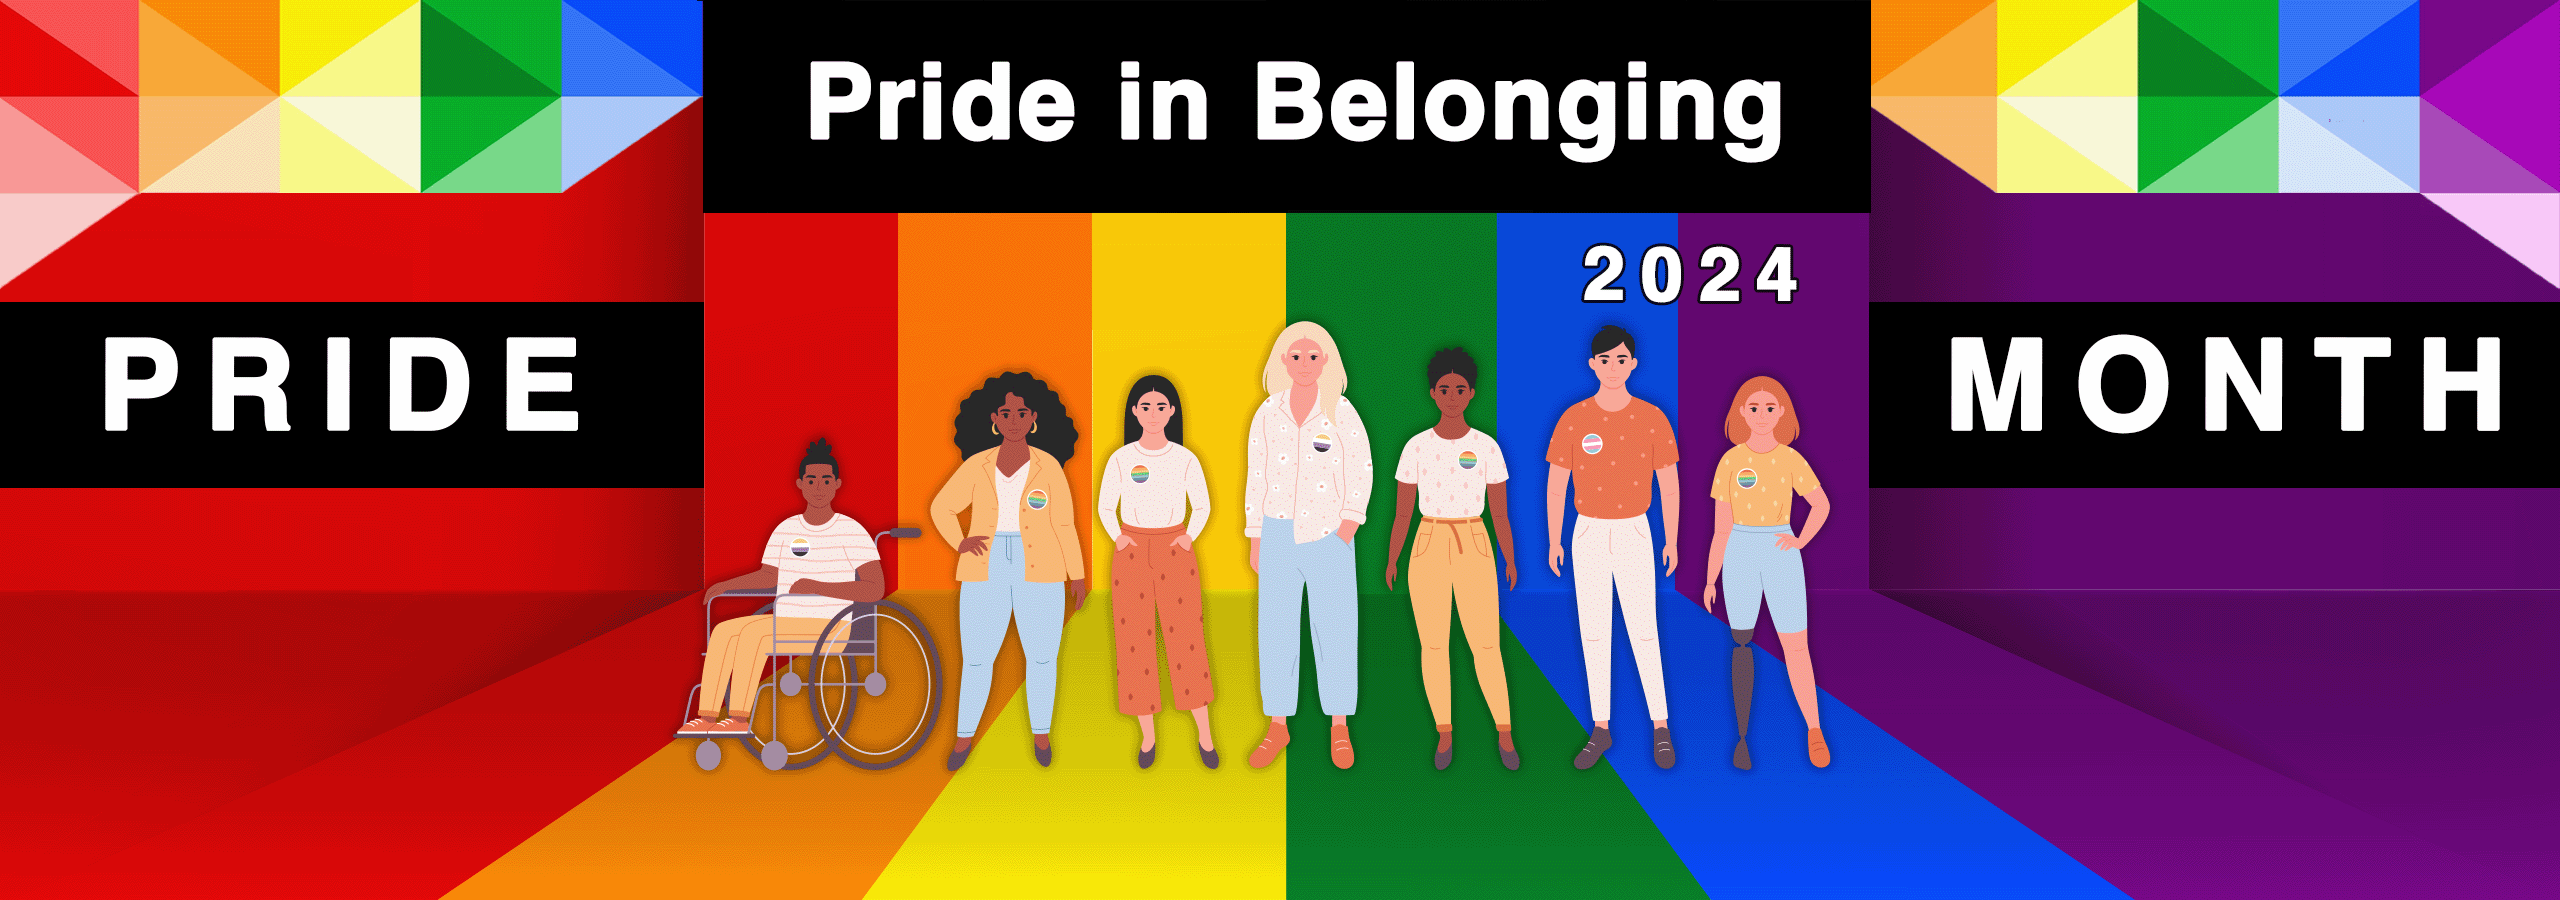 The 2024 Pride Month artwork features theme, Pride in Belonging, with a diverse group of people standing in front of the original Pride flag created by Gilbert Baker.